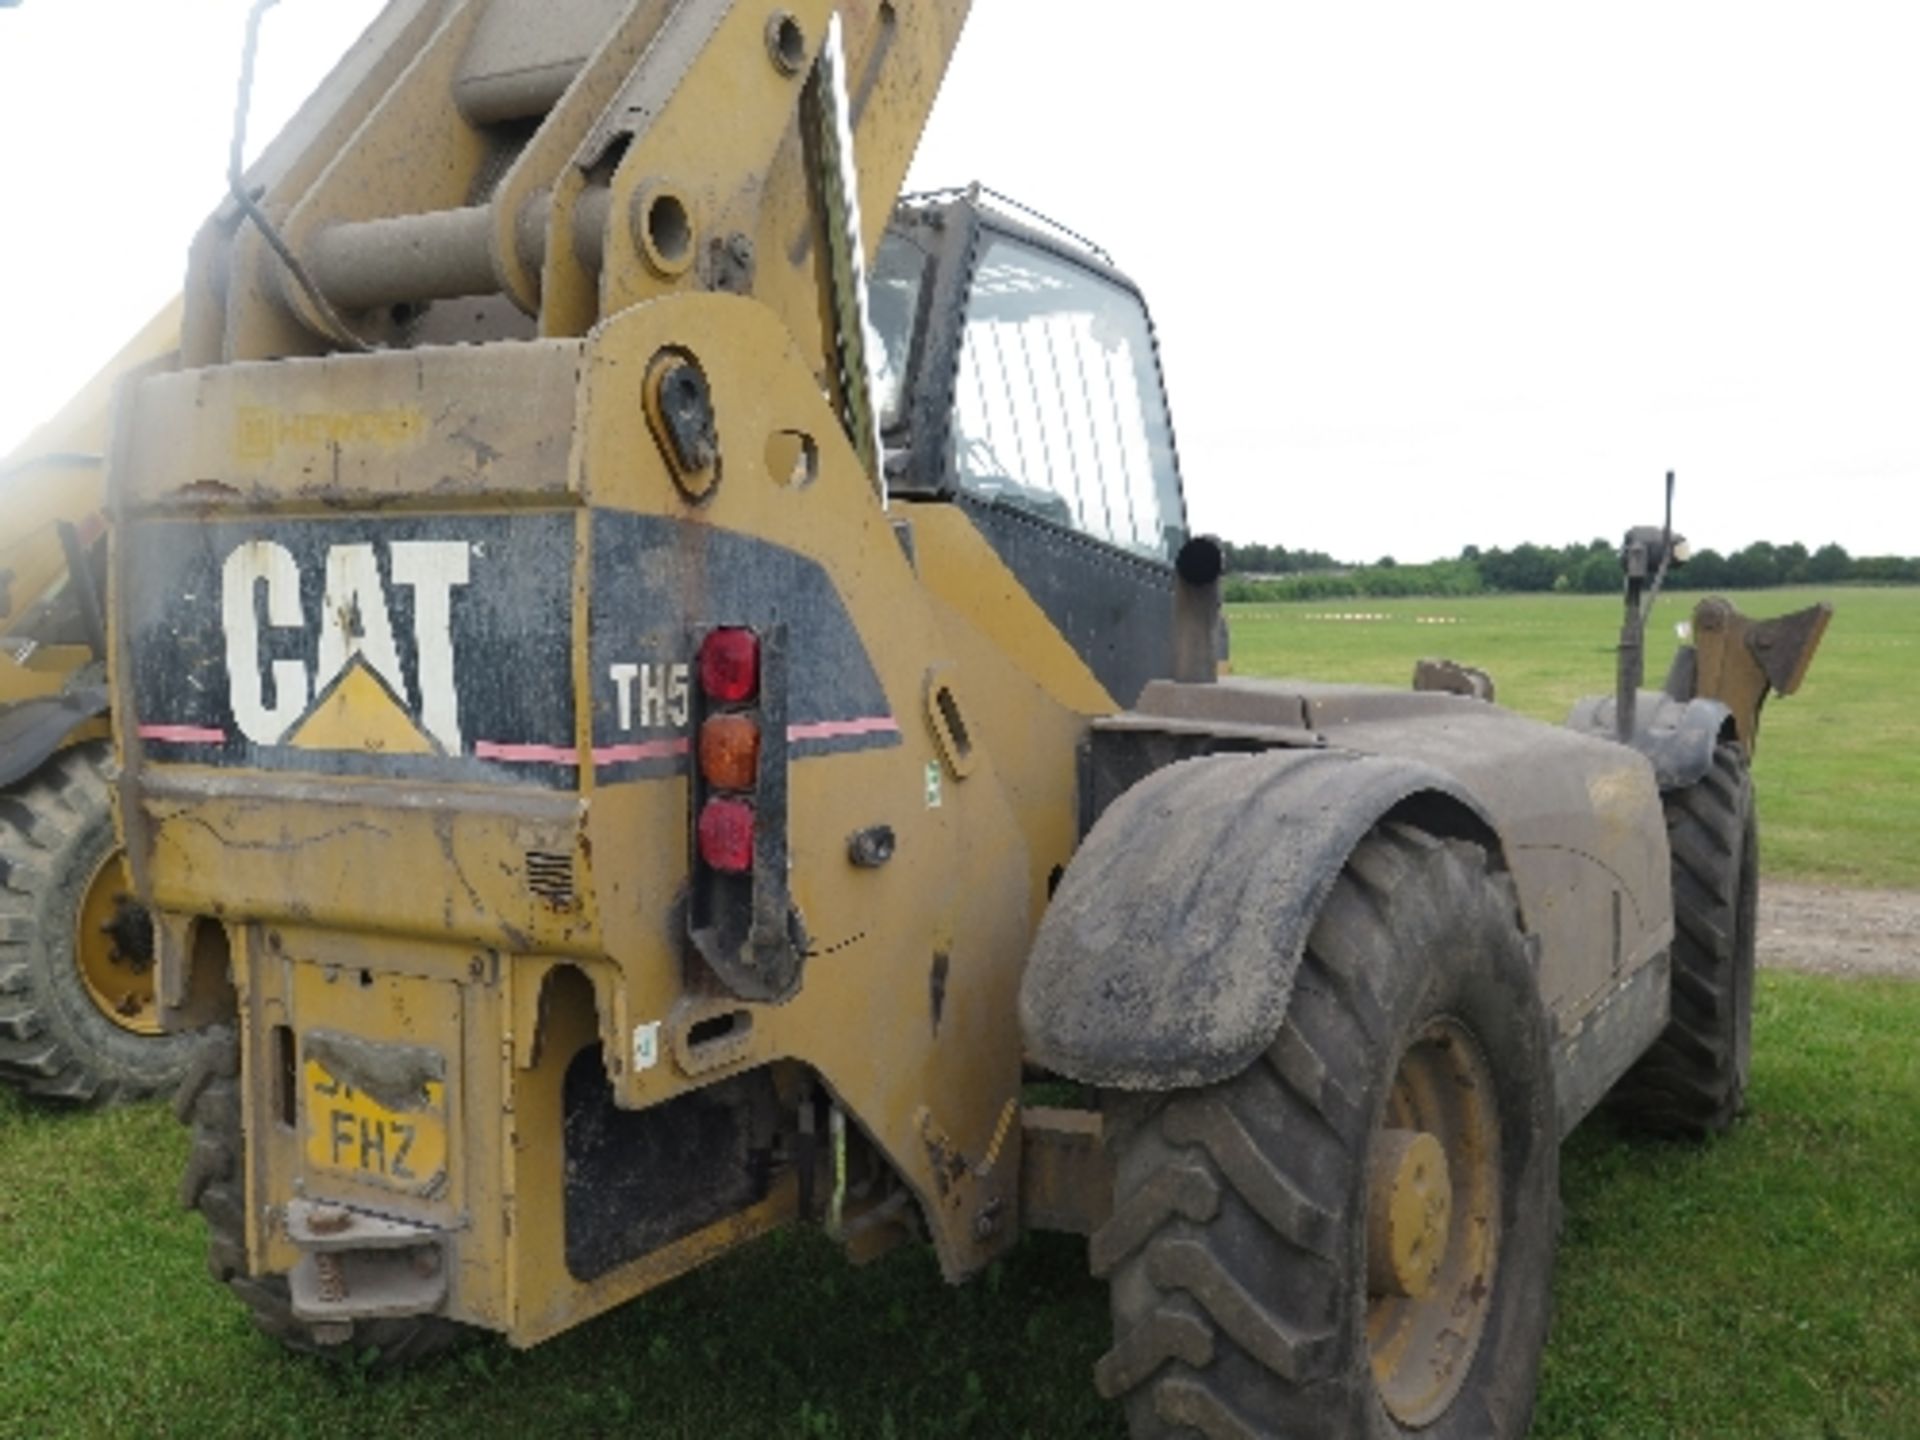 Caterpillar TH580B telehandler 7061 hrs  136316
BELIEVED 2005
POOR COSMETICS
ALL LOTS are SOLD AS - Image 5 of 8